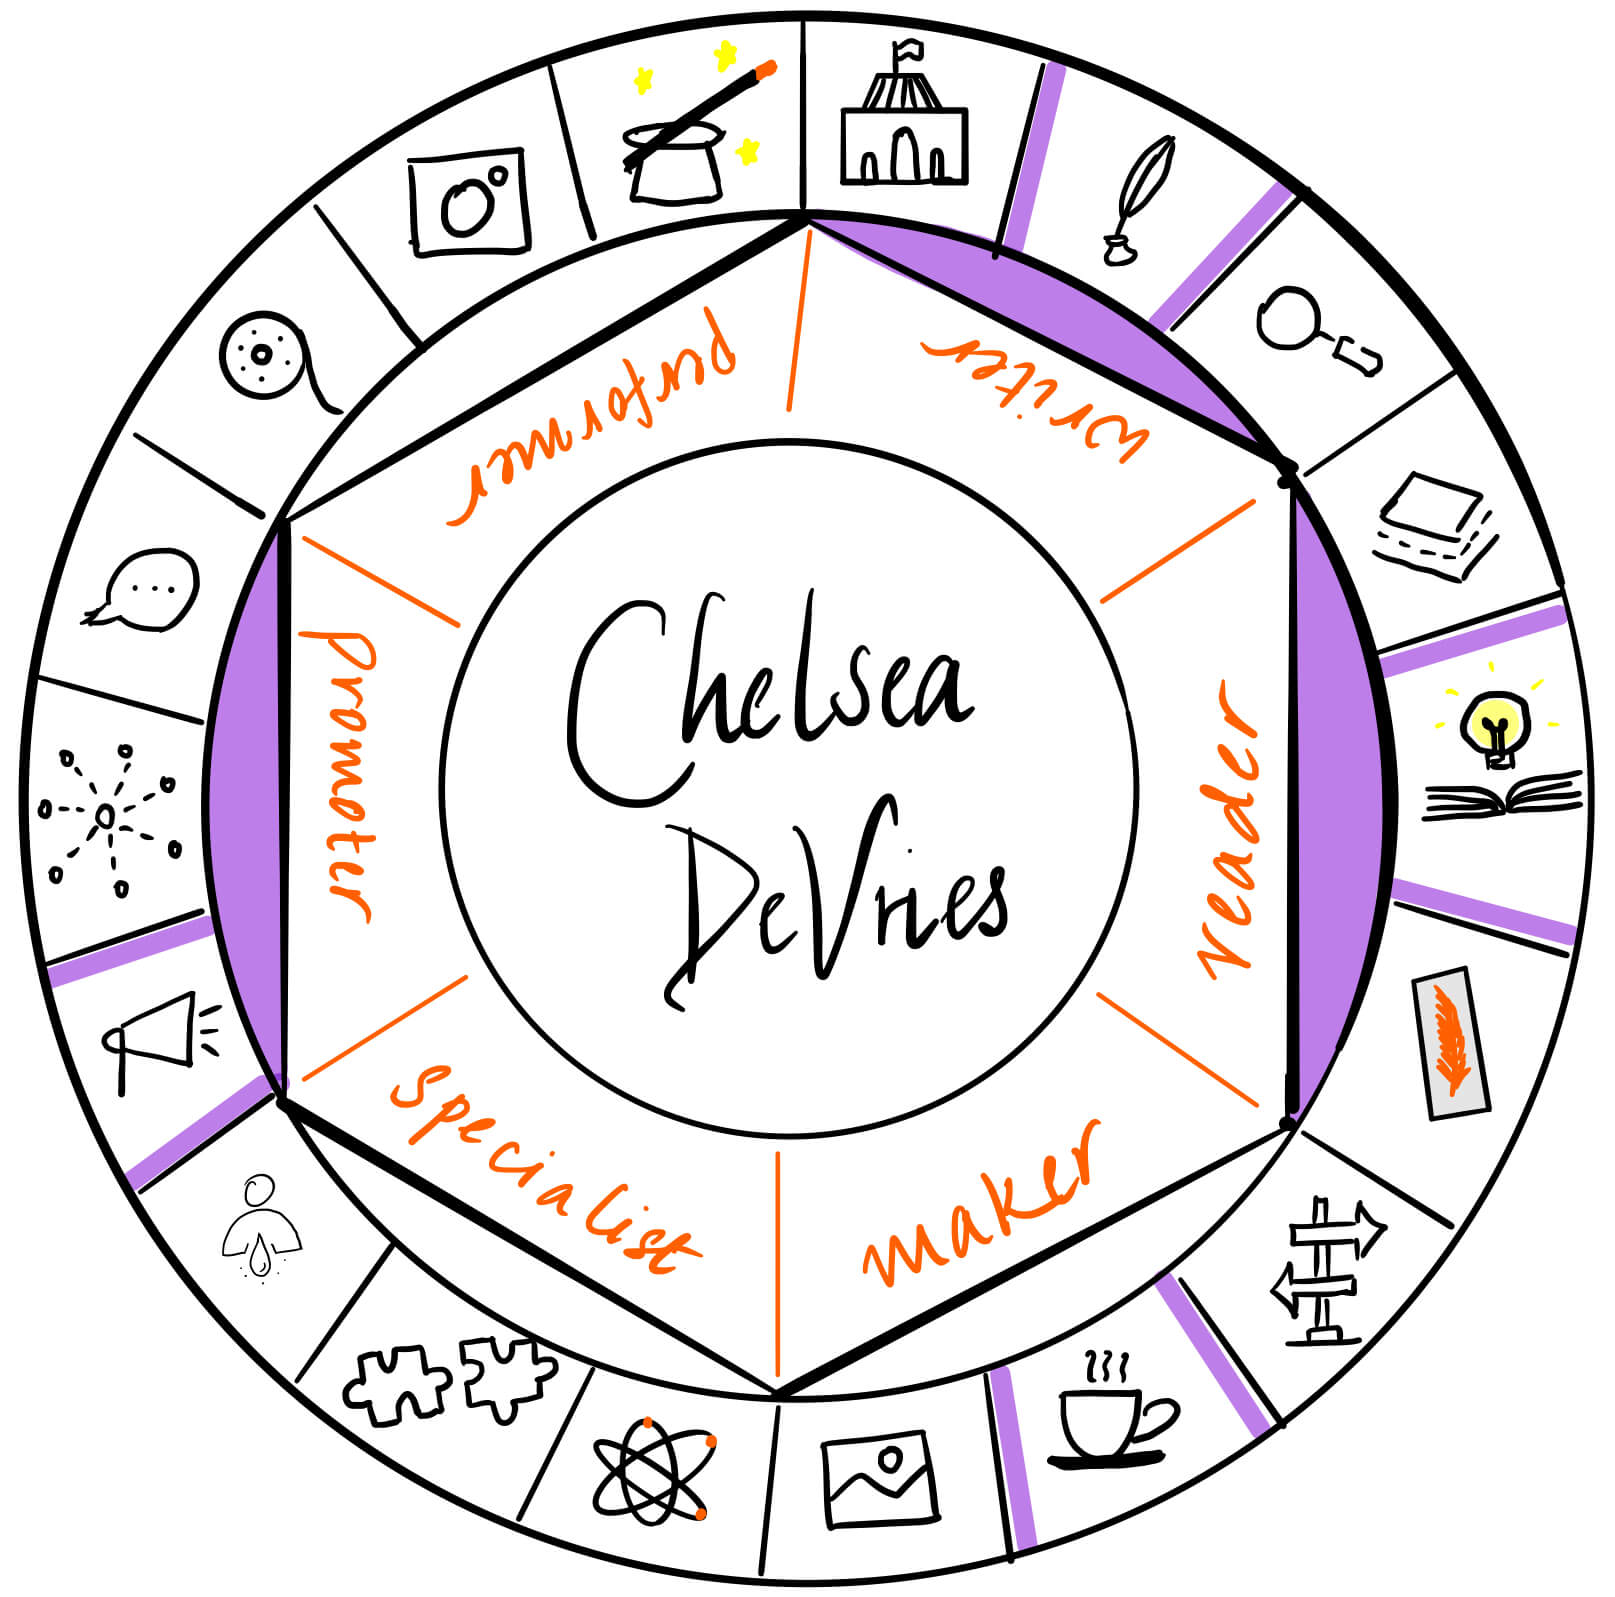 Chealsea DeVries is a writer, reader and promoter. It's a pleasure to have her over on The Creator's Roulette to talk about life of a publicist.